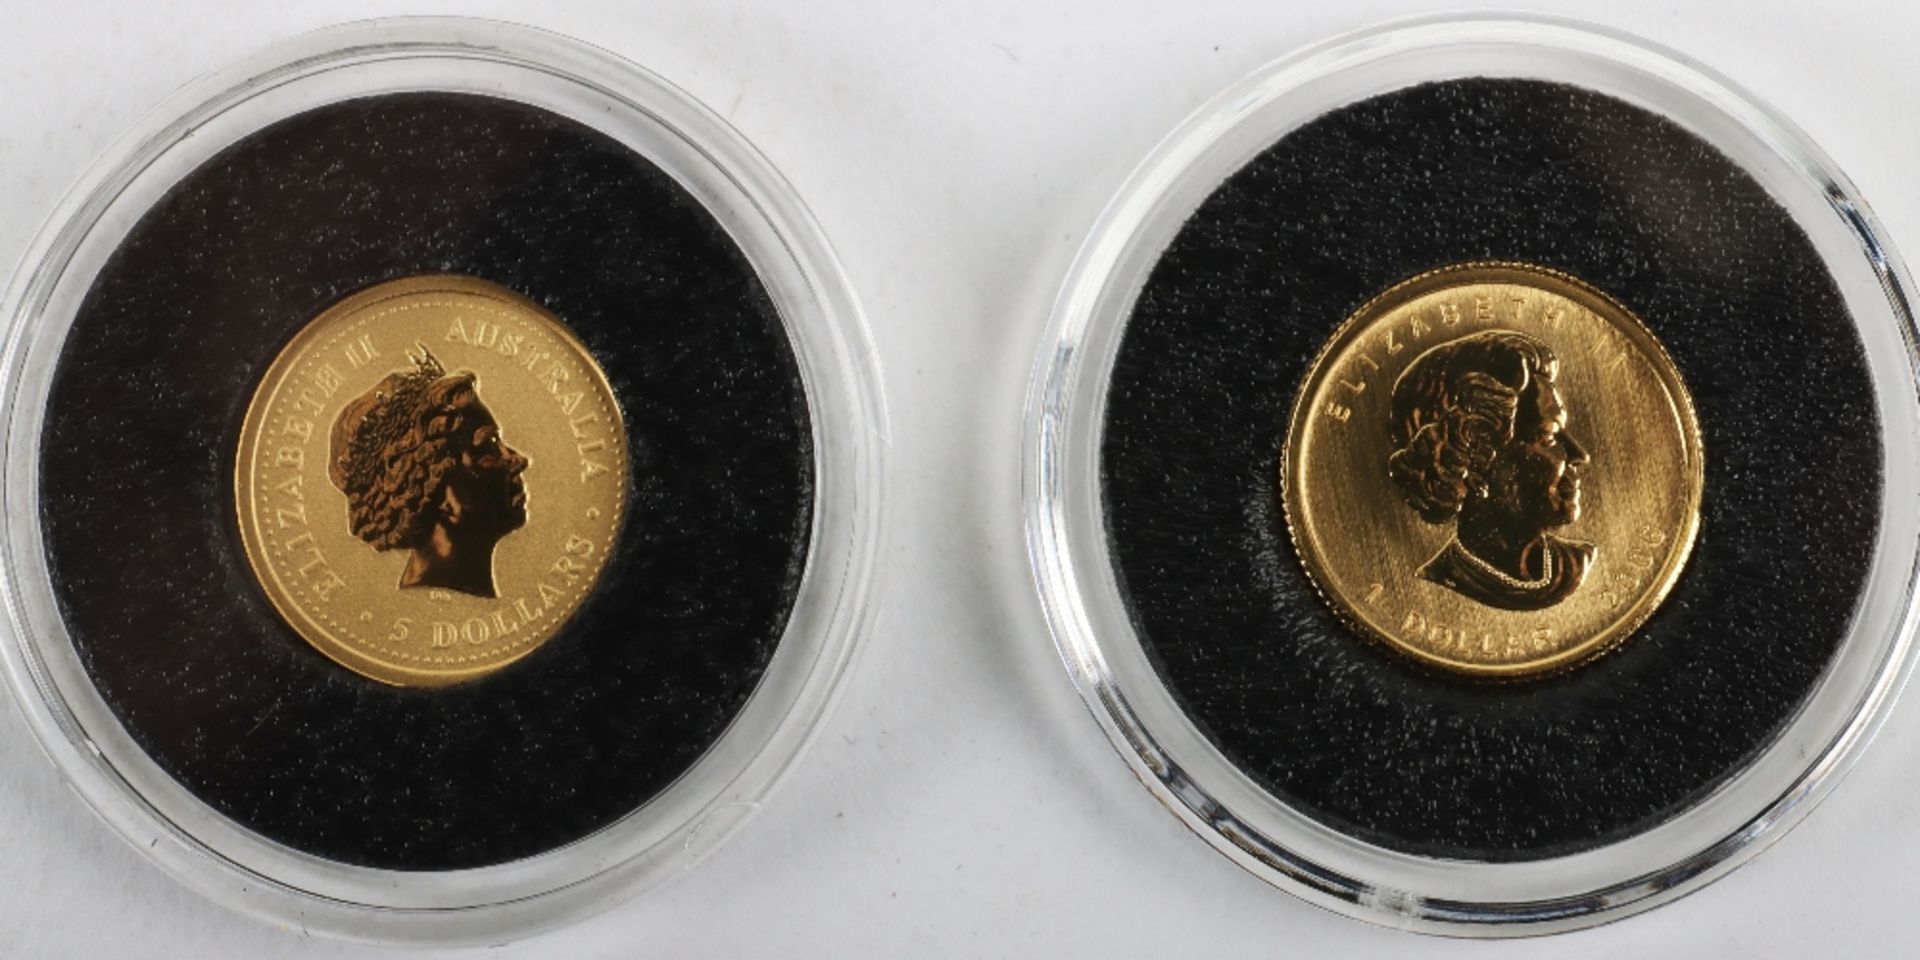 Two 1/20th oz fine gold coins